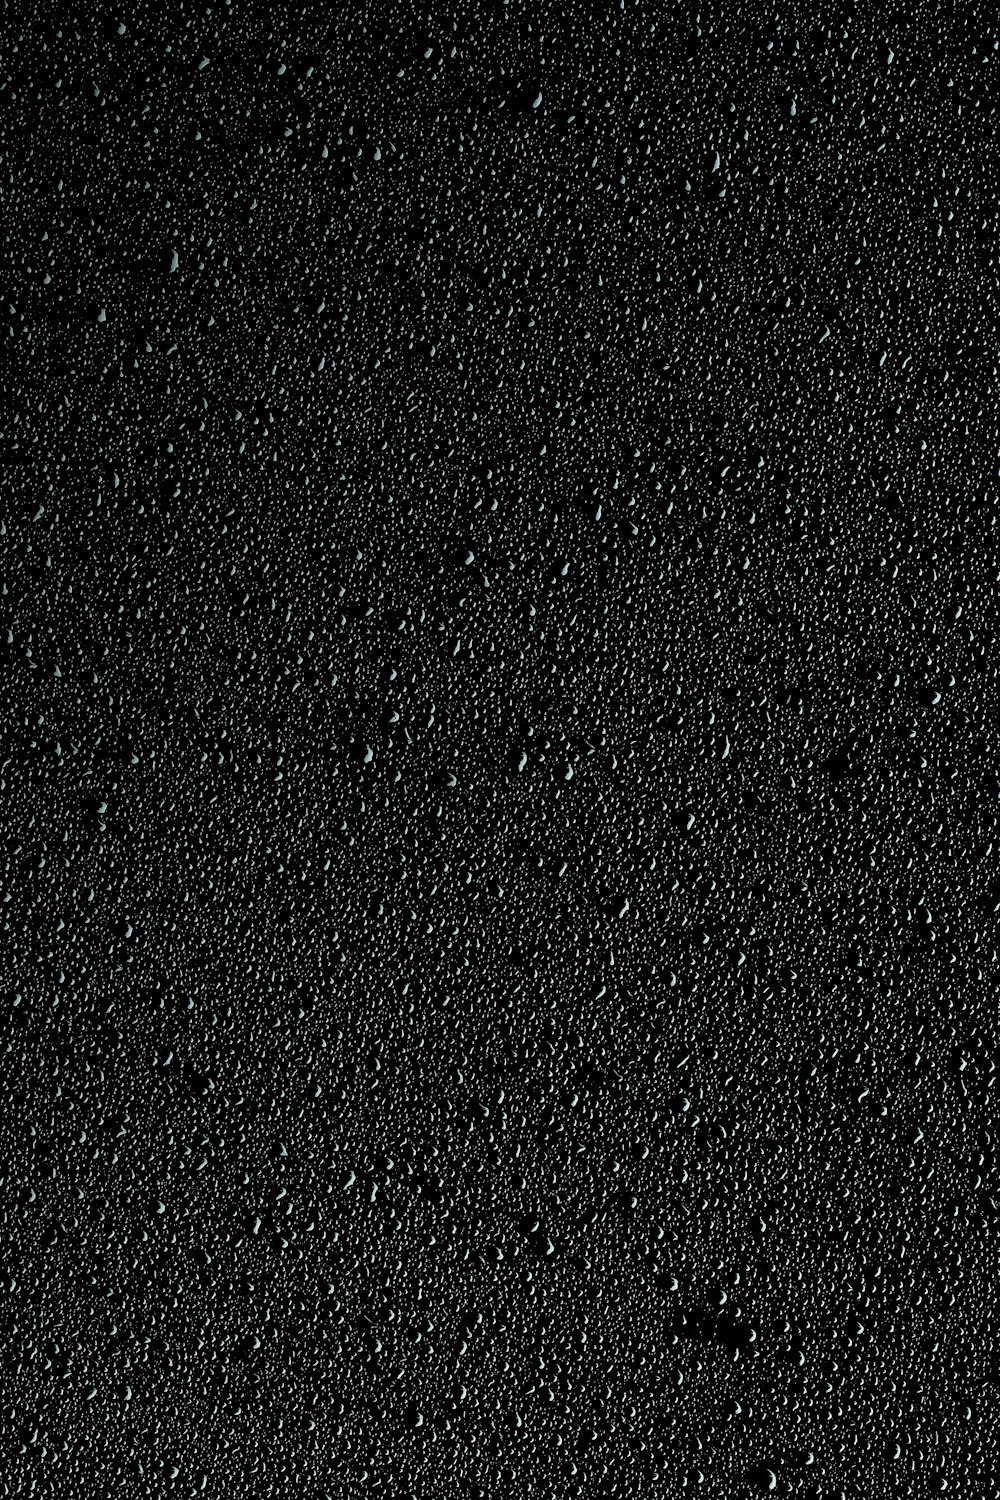 a black background with small bubbles of water